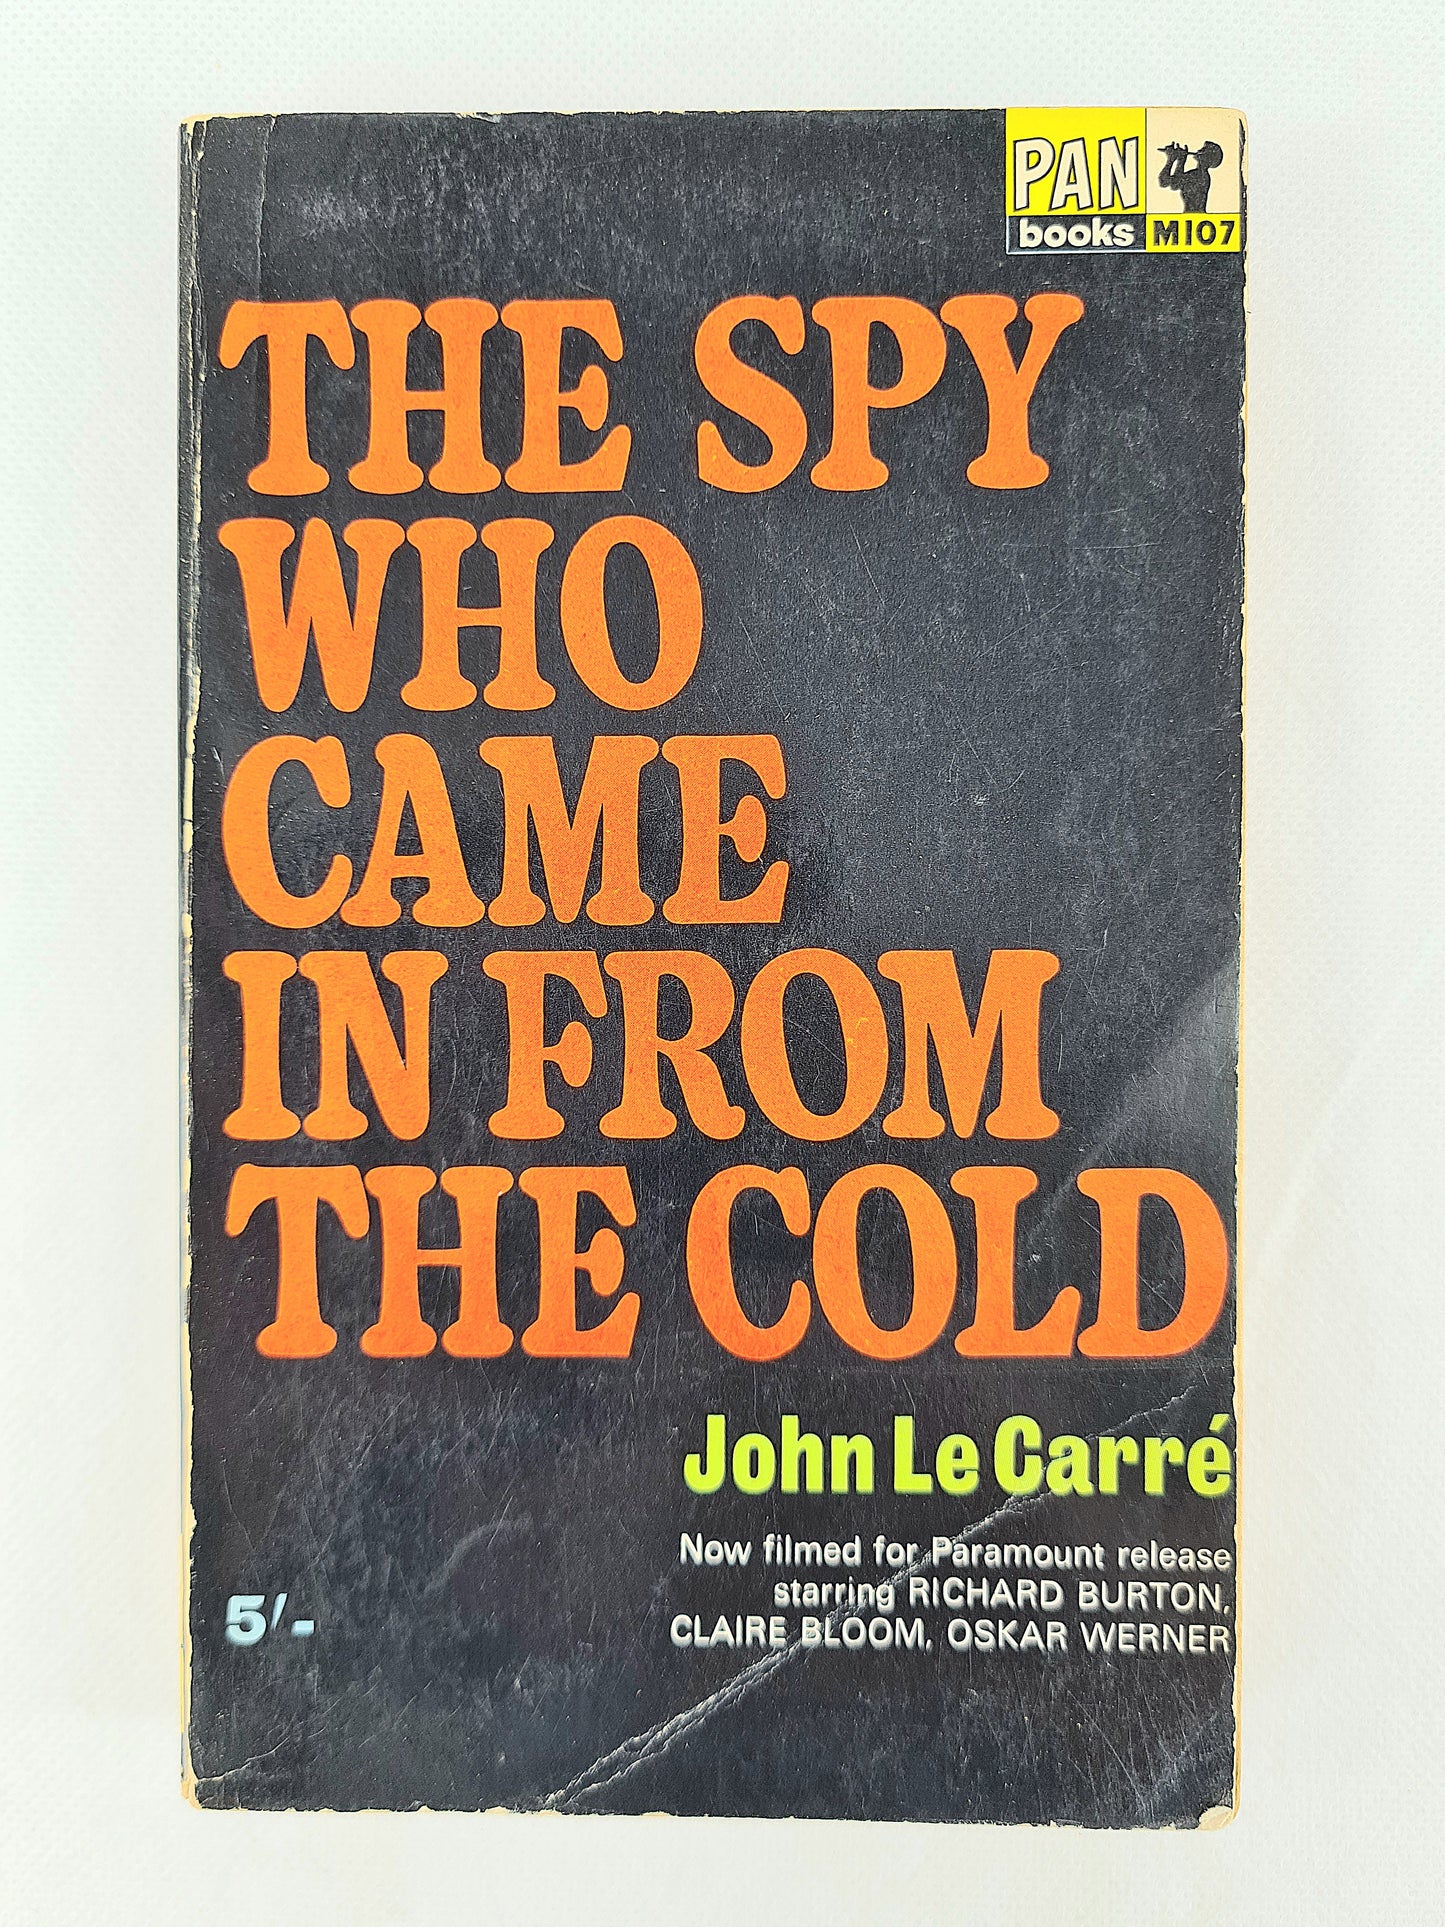 The Spy Who Came In From The Cold. Vintage paperback books. Pan books